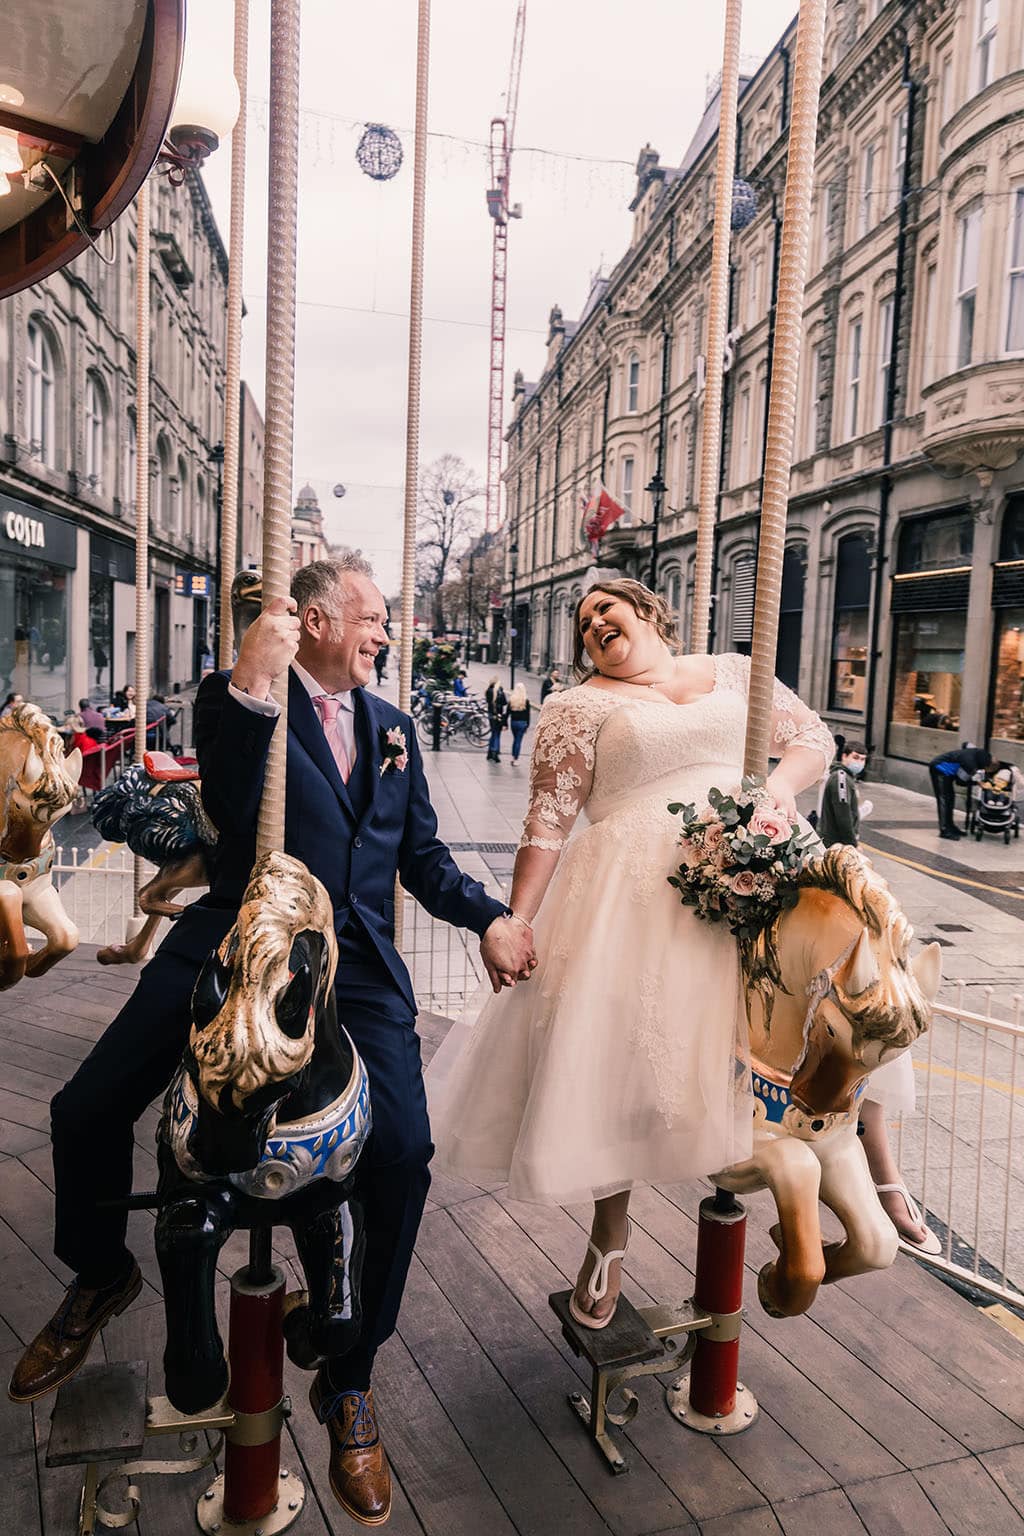 Bride and Groom on carousel in Cardiff City Center